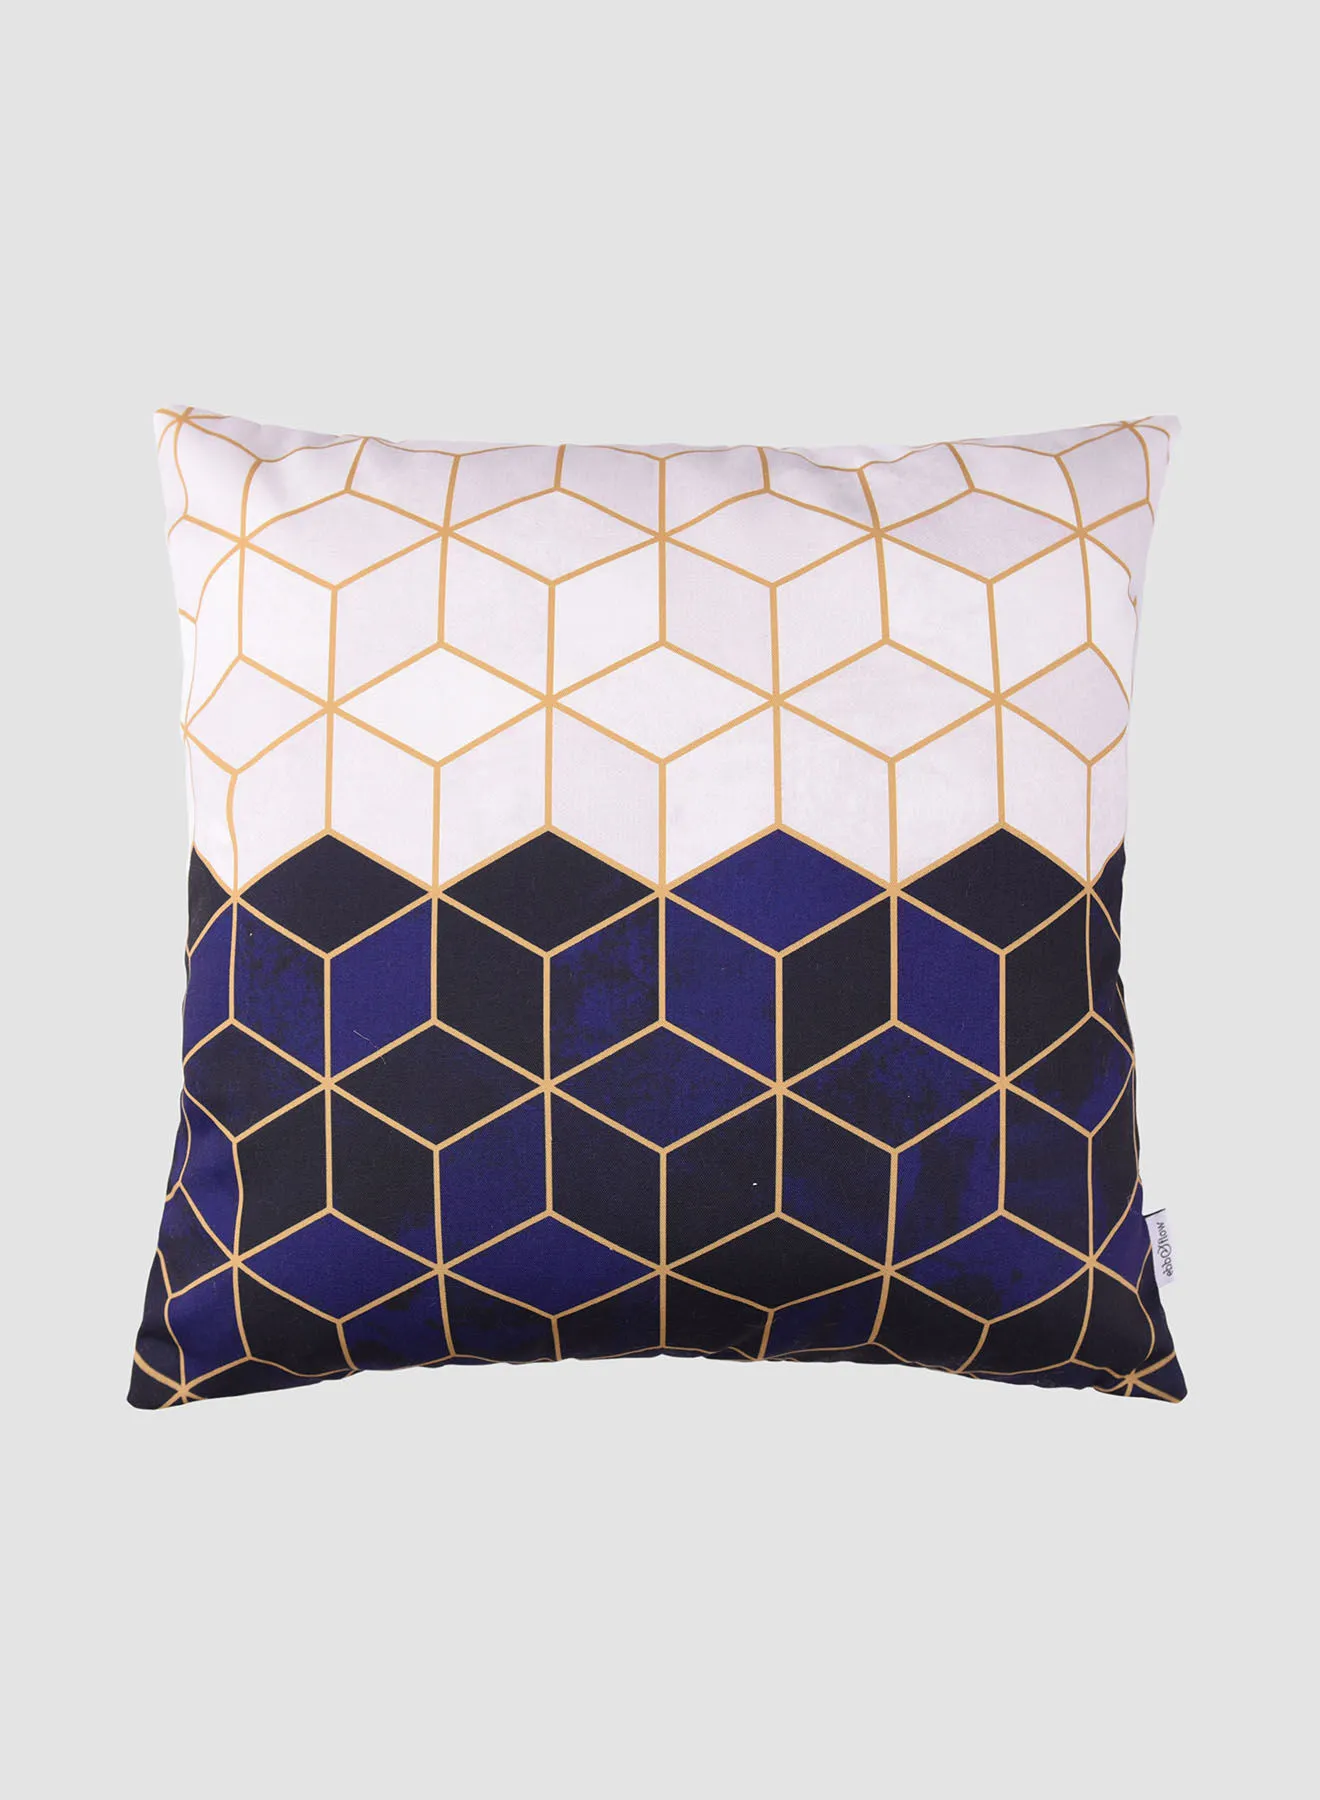 ebb & flow Printed Cushion, Unique Luxury Quality Decor Items for the Perfect Stylish Home Multicolour CUS266 45 x 45cm